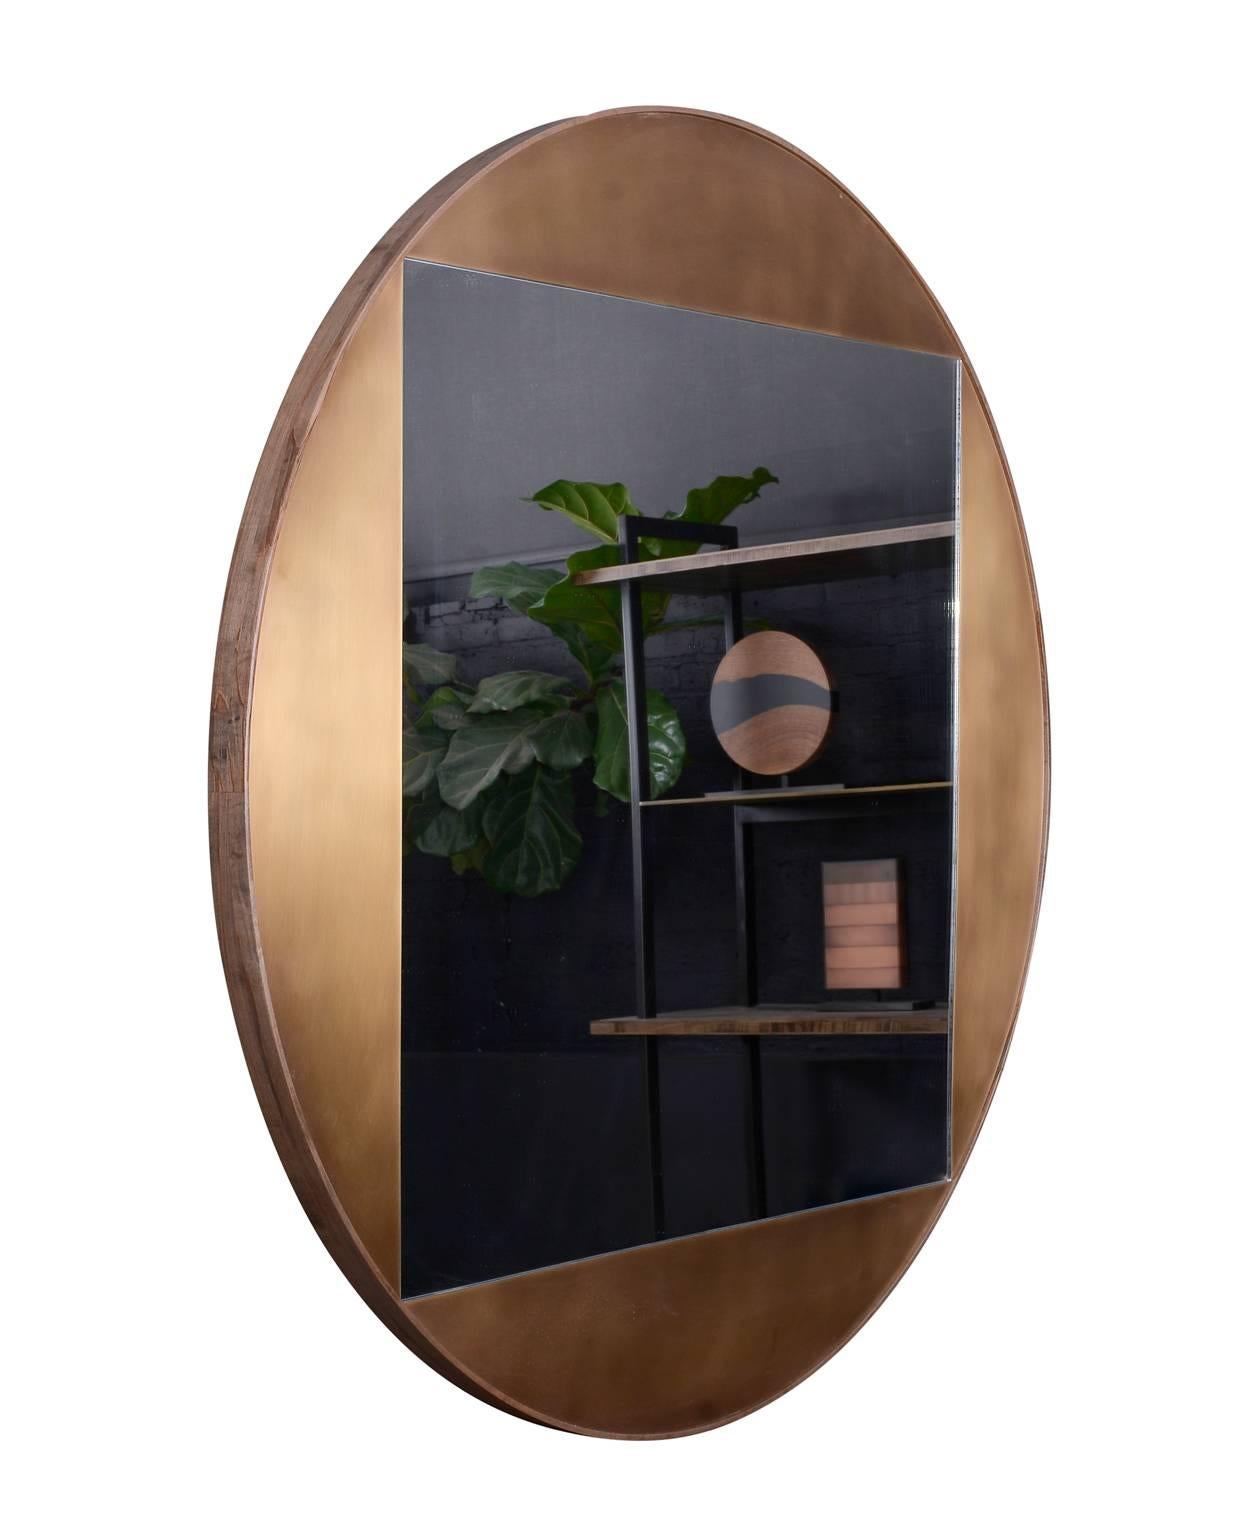 Part of the elegant Gotham collection, the round mirror is composed of patinated bronze and oxidized ambrosia maple. The juxtaposition of shapes, both sharp and curved, lends balance and sophistication to this piece. Regular lead time 10-12